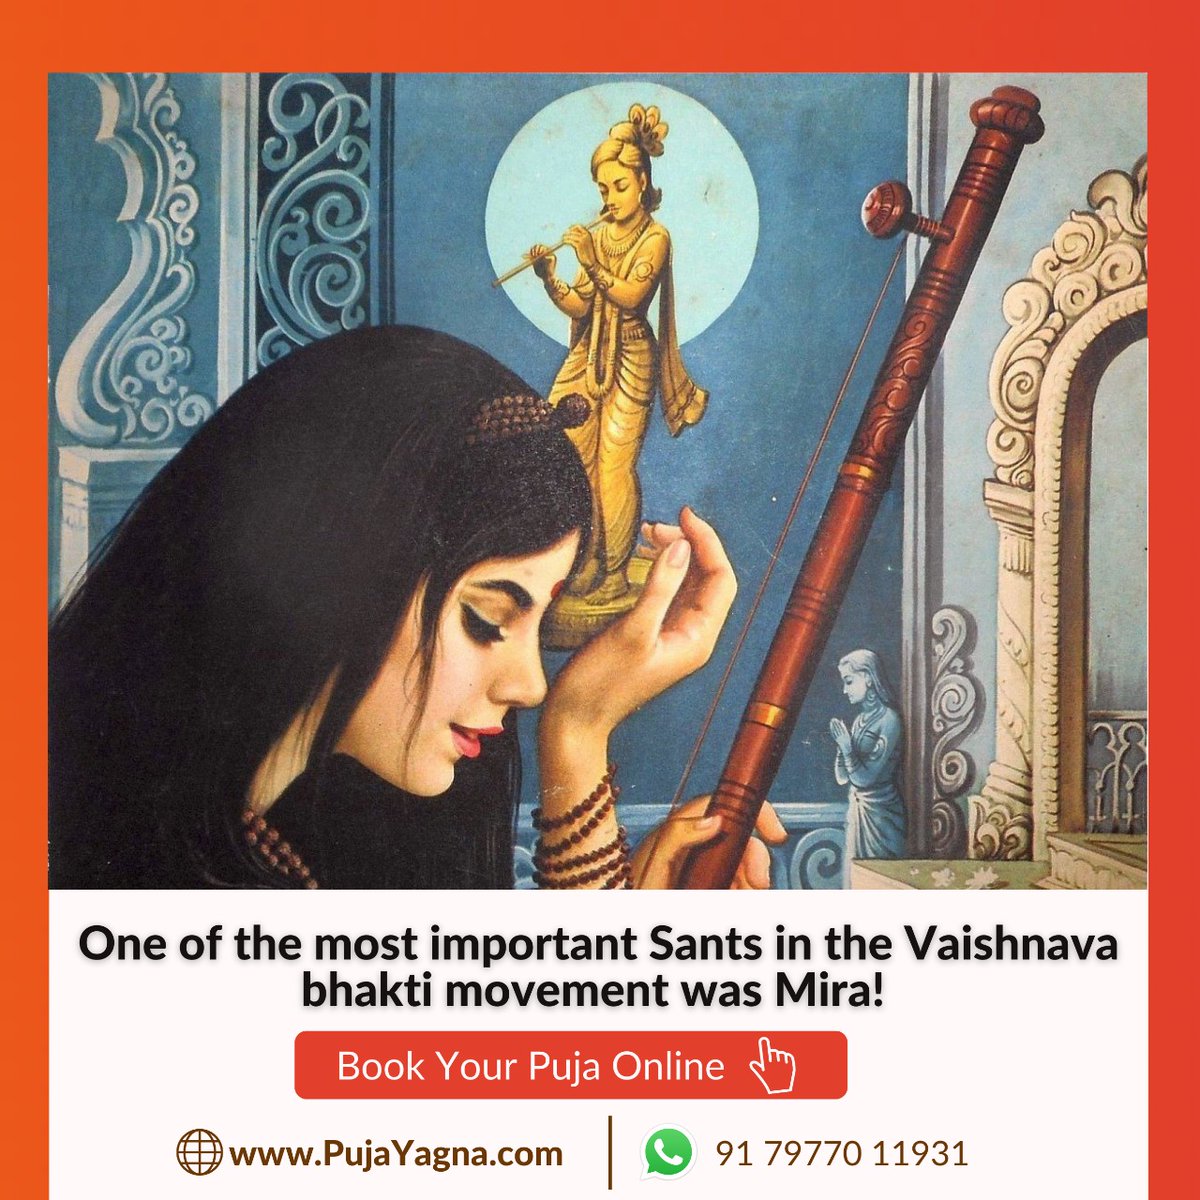 One of the most important Sants in the Vaishnava bhakti movement was Mira!

Go over to pujayagna.com/products/mira-… to book it online form Eshwar Bhakti now!

#bookforpandit #onlinepoojan #onlinepoojabooking #onlinepoojaservices #onlineprasad #onlinebookings